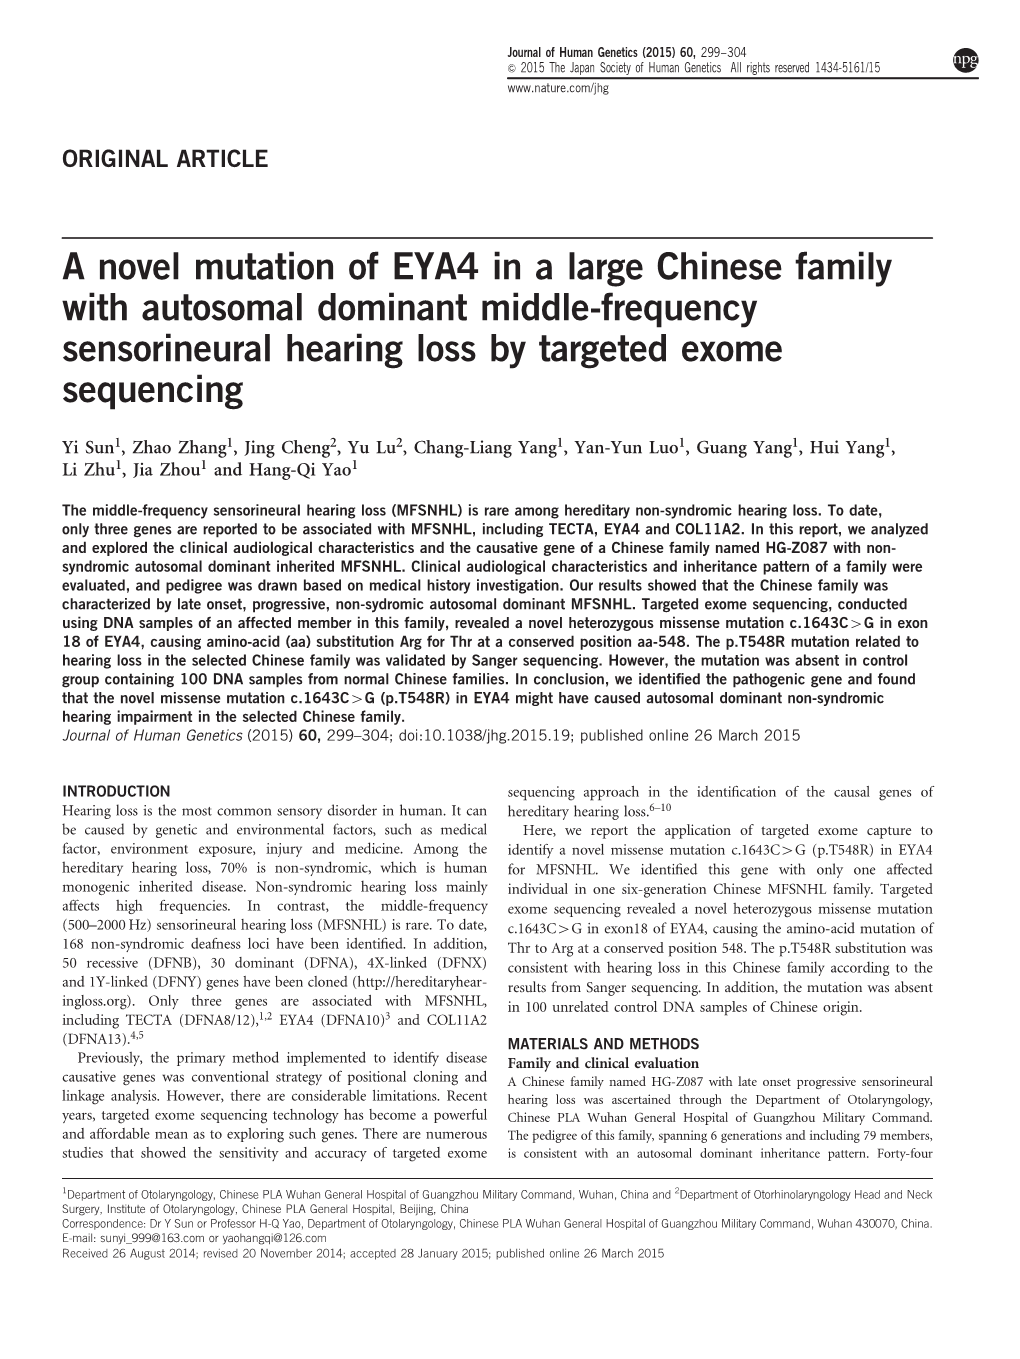 A Novel Mutation of EYA4 in a Large Chinese Family with Autosomal Dominant Middle-Frequency Sensorineural Hearing Loss by Targeted Exome Sequencing